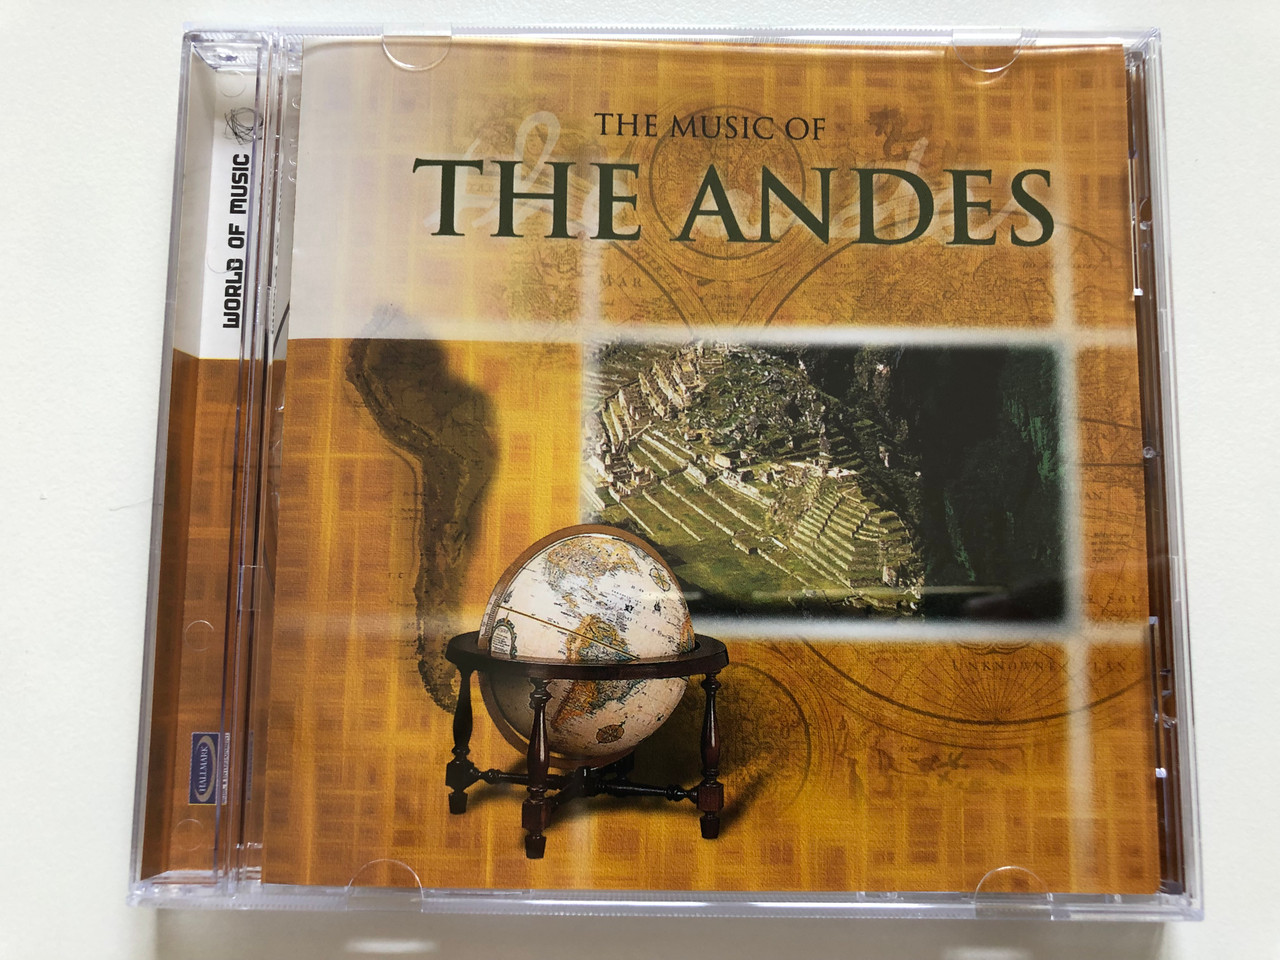 https://cdn10.bigcommerce.com/s-62bdpkt7pb/products/30713/images/181363/The_Music_Of_Andes_World_Of_Music_Hallmark_Music_Entertainment_Audio_CD_2003_704422_1__81879.1623742730.1280.1280.JPG?c=2&_ga=2.162731706.787544708.1623769862-1646000393.1623769862